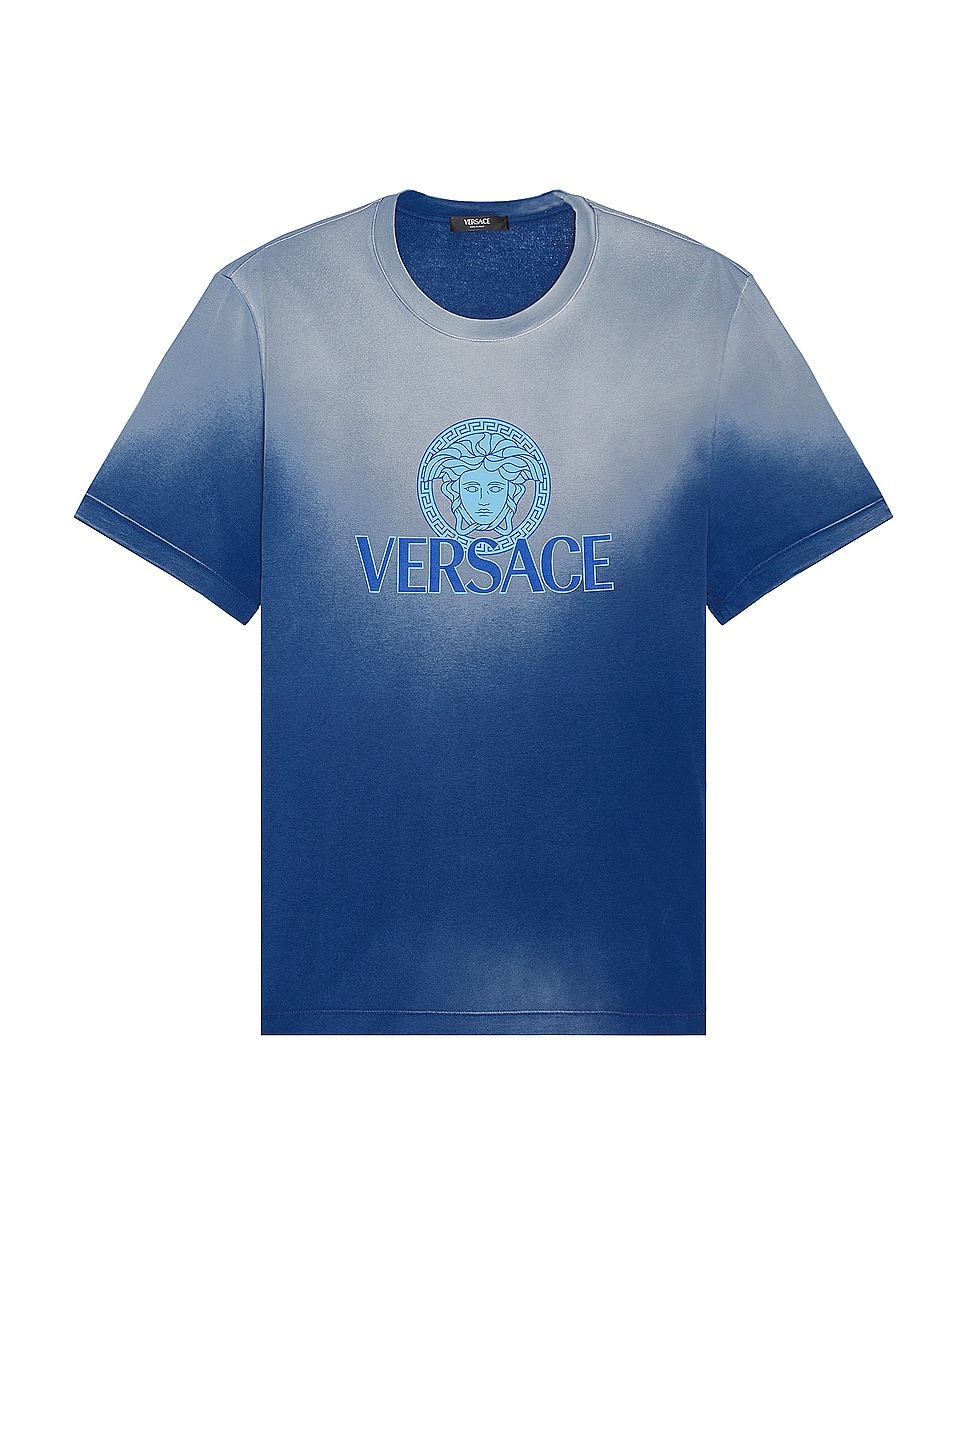 Image 1 of VERSACE Overdye T-shirt in Royal Blue